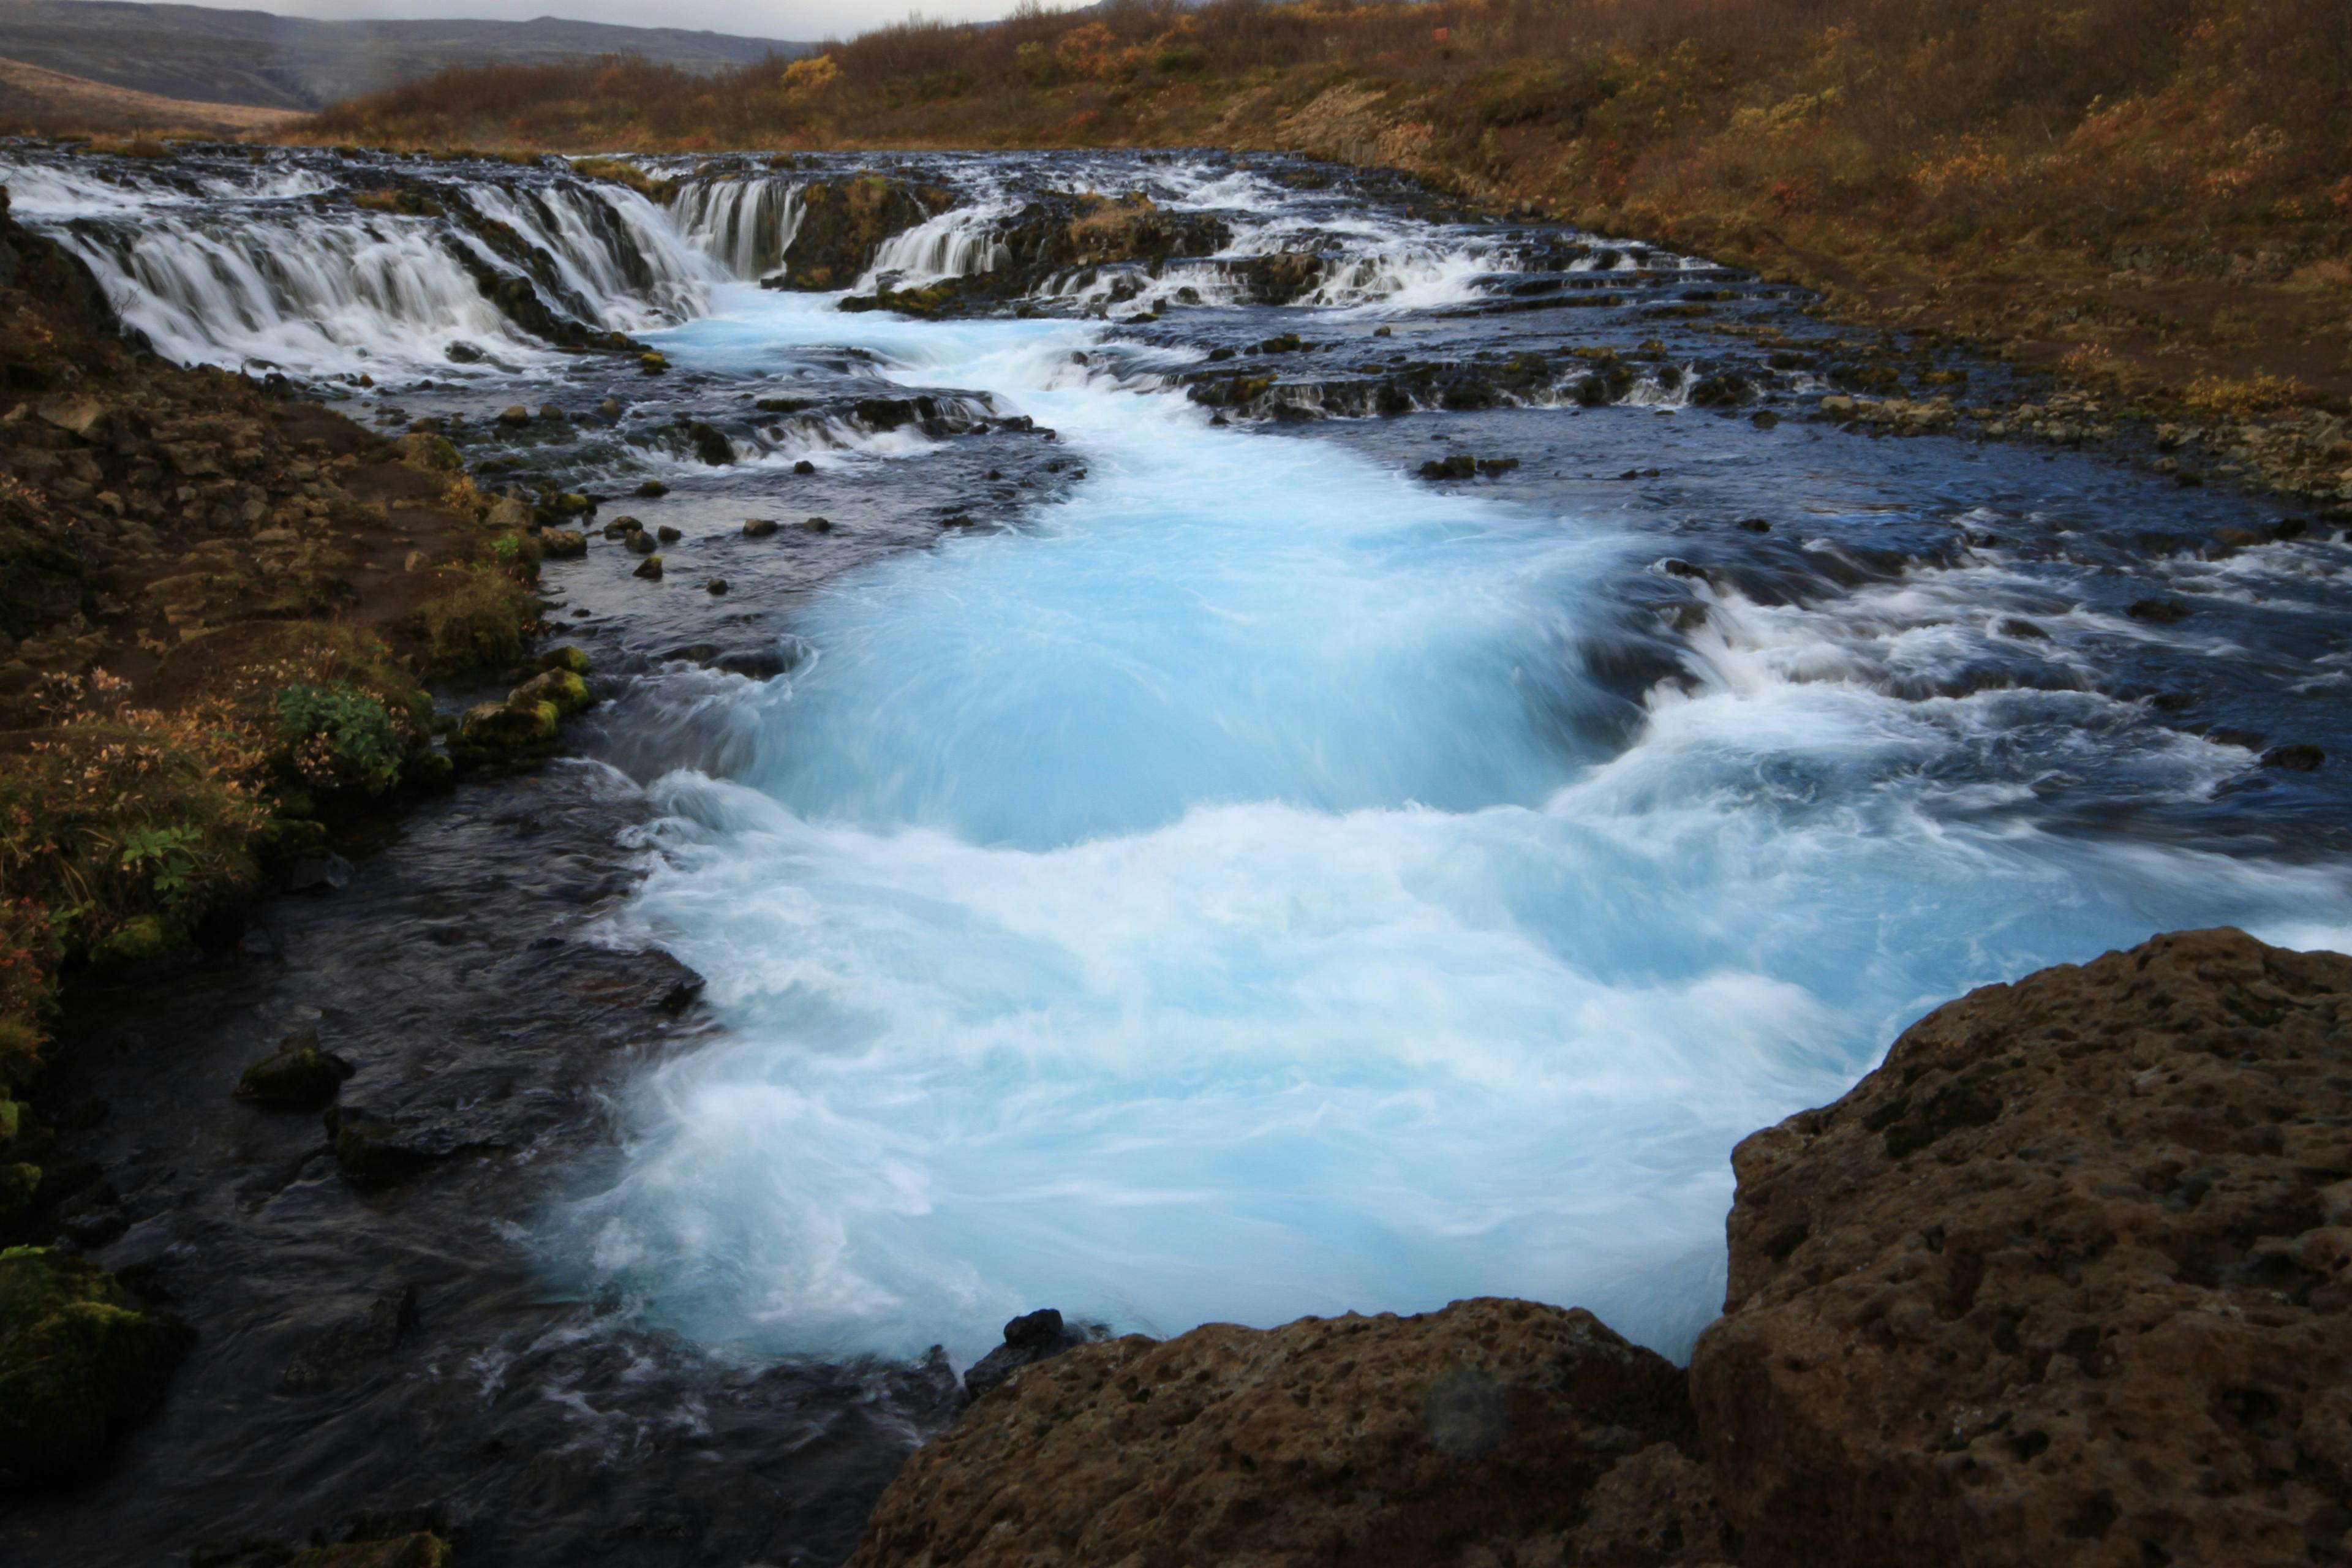 A vivid blue stream rushing through a multi-tiered waterfall, framed by rugged terrain and autumn-hued vegetation, capturing the raw beauty of Iceland's dynamic waterways.